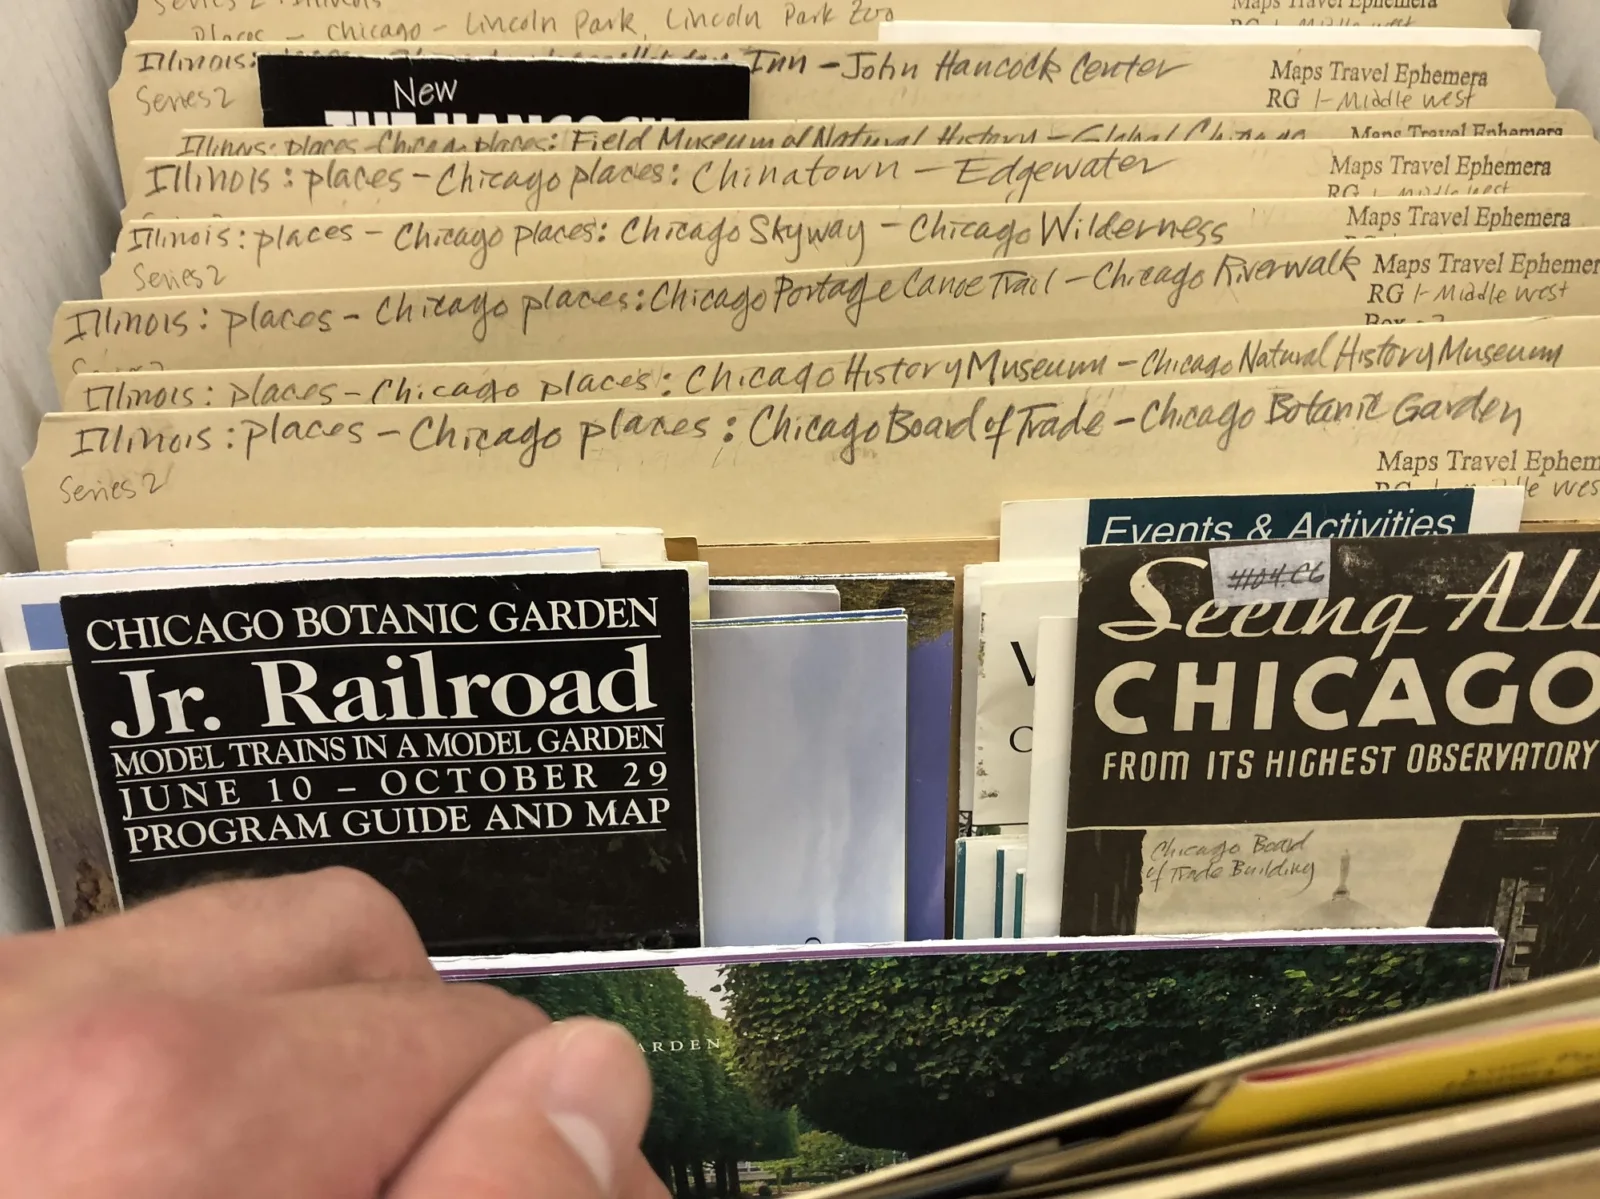 A hand leafs through archival folders filled with Chicago travel ephemera.